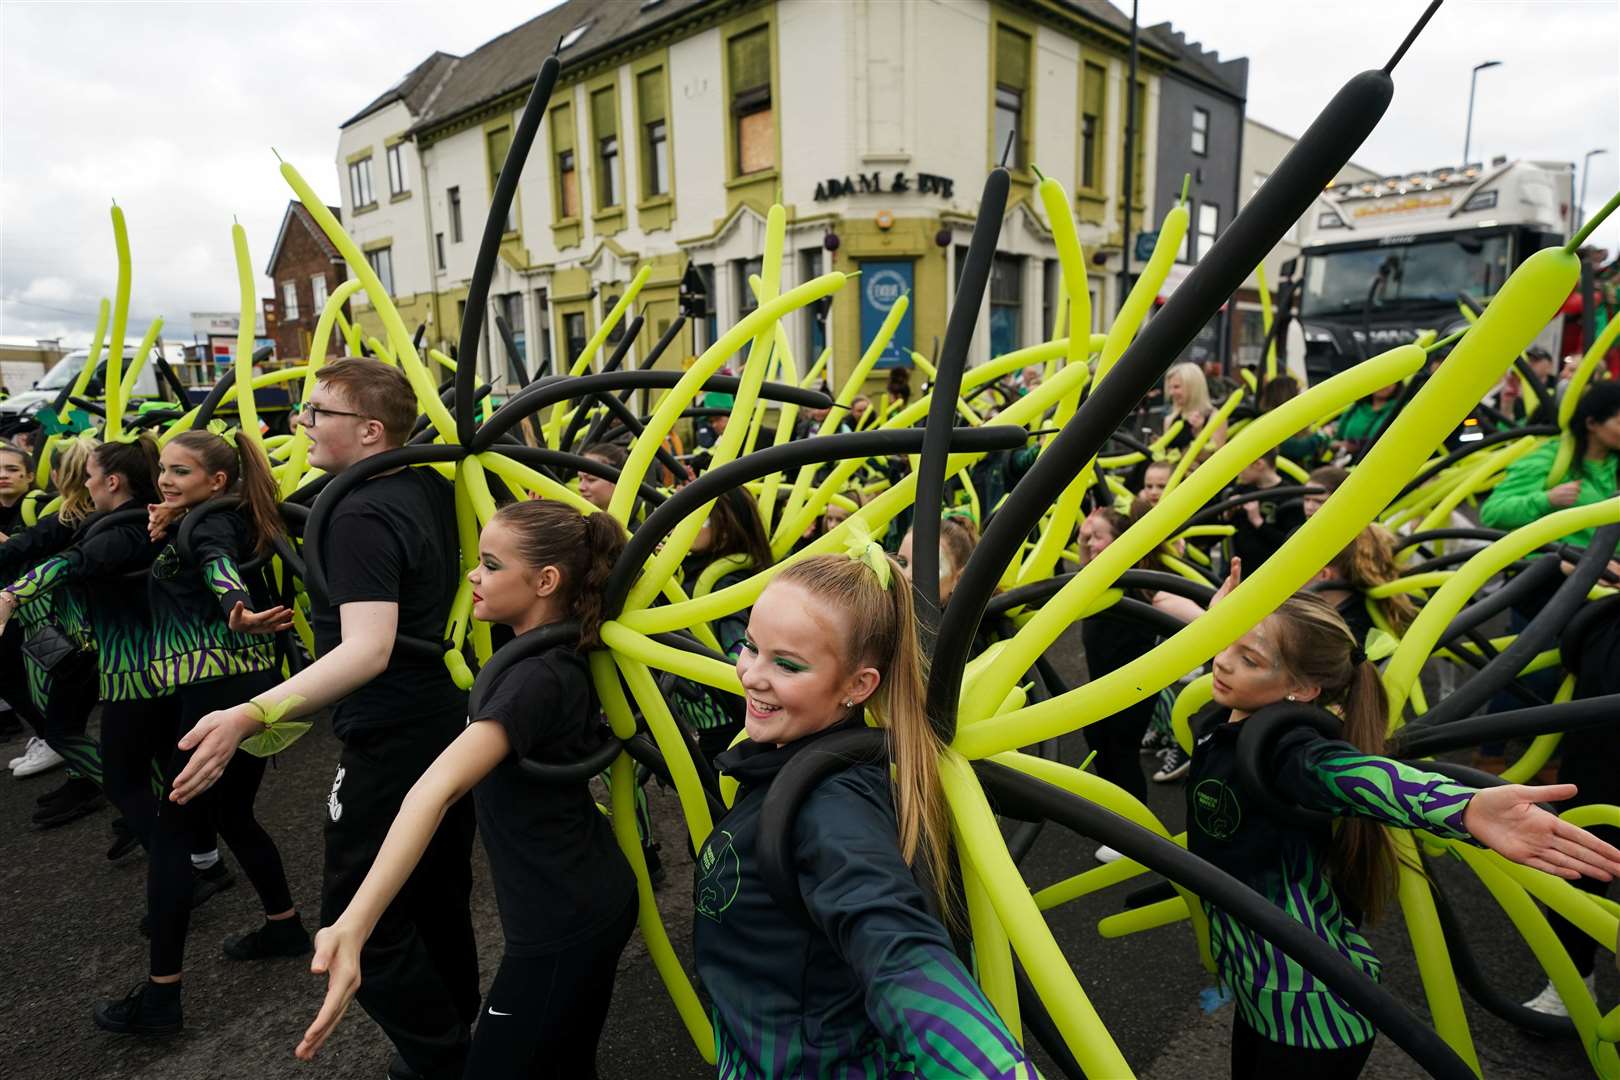 Young people were among those taking part in the Birmingham event (Jacob King/PA)